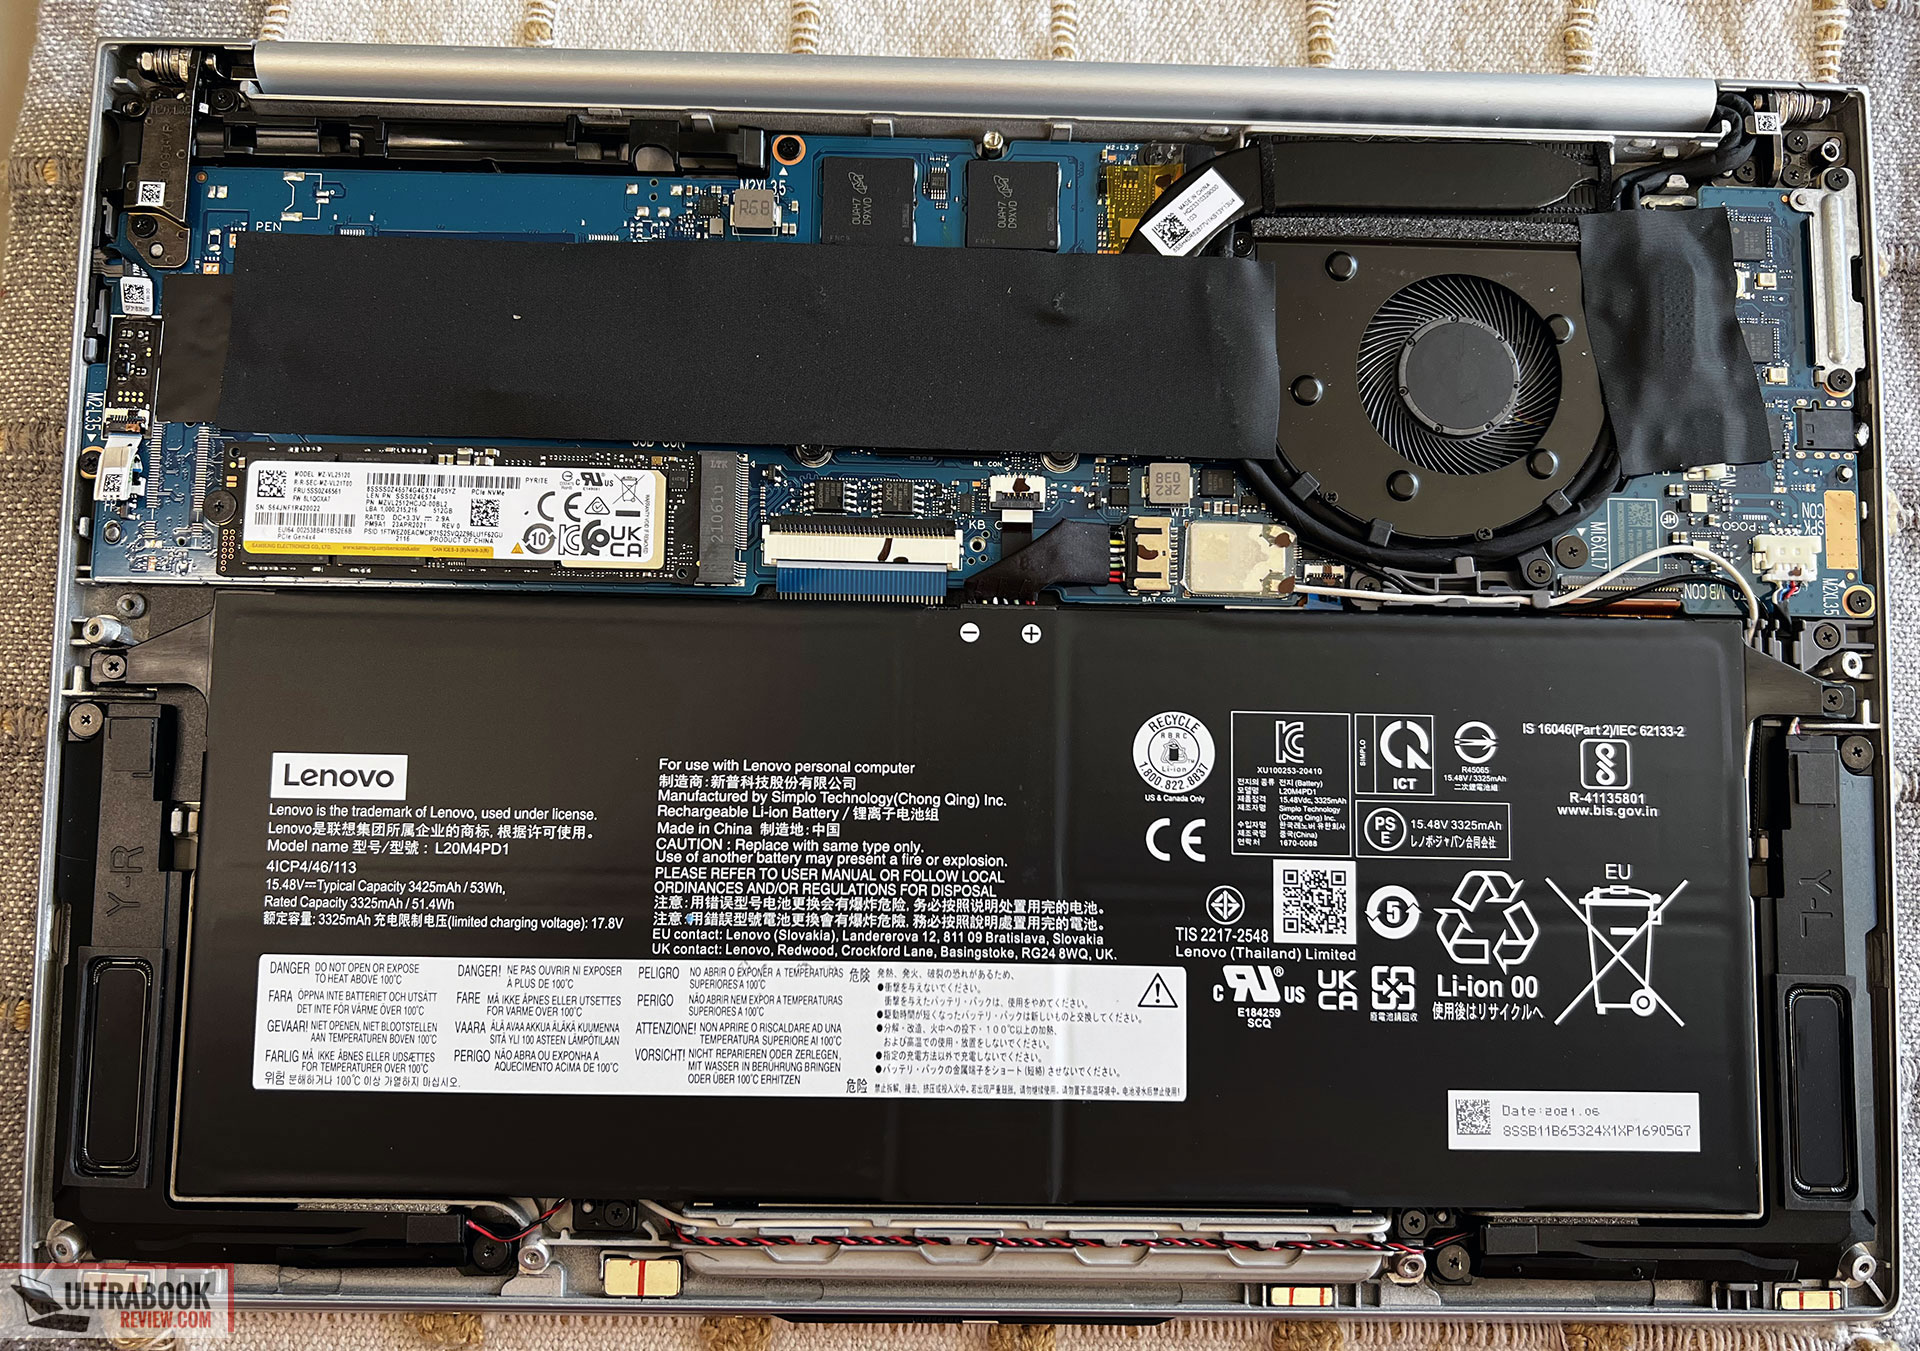 Lenovo ThinkBook 13x review - internals and dissasembly 